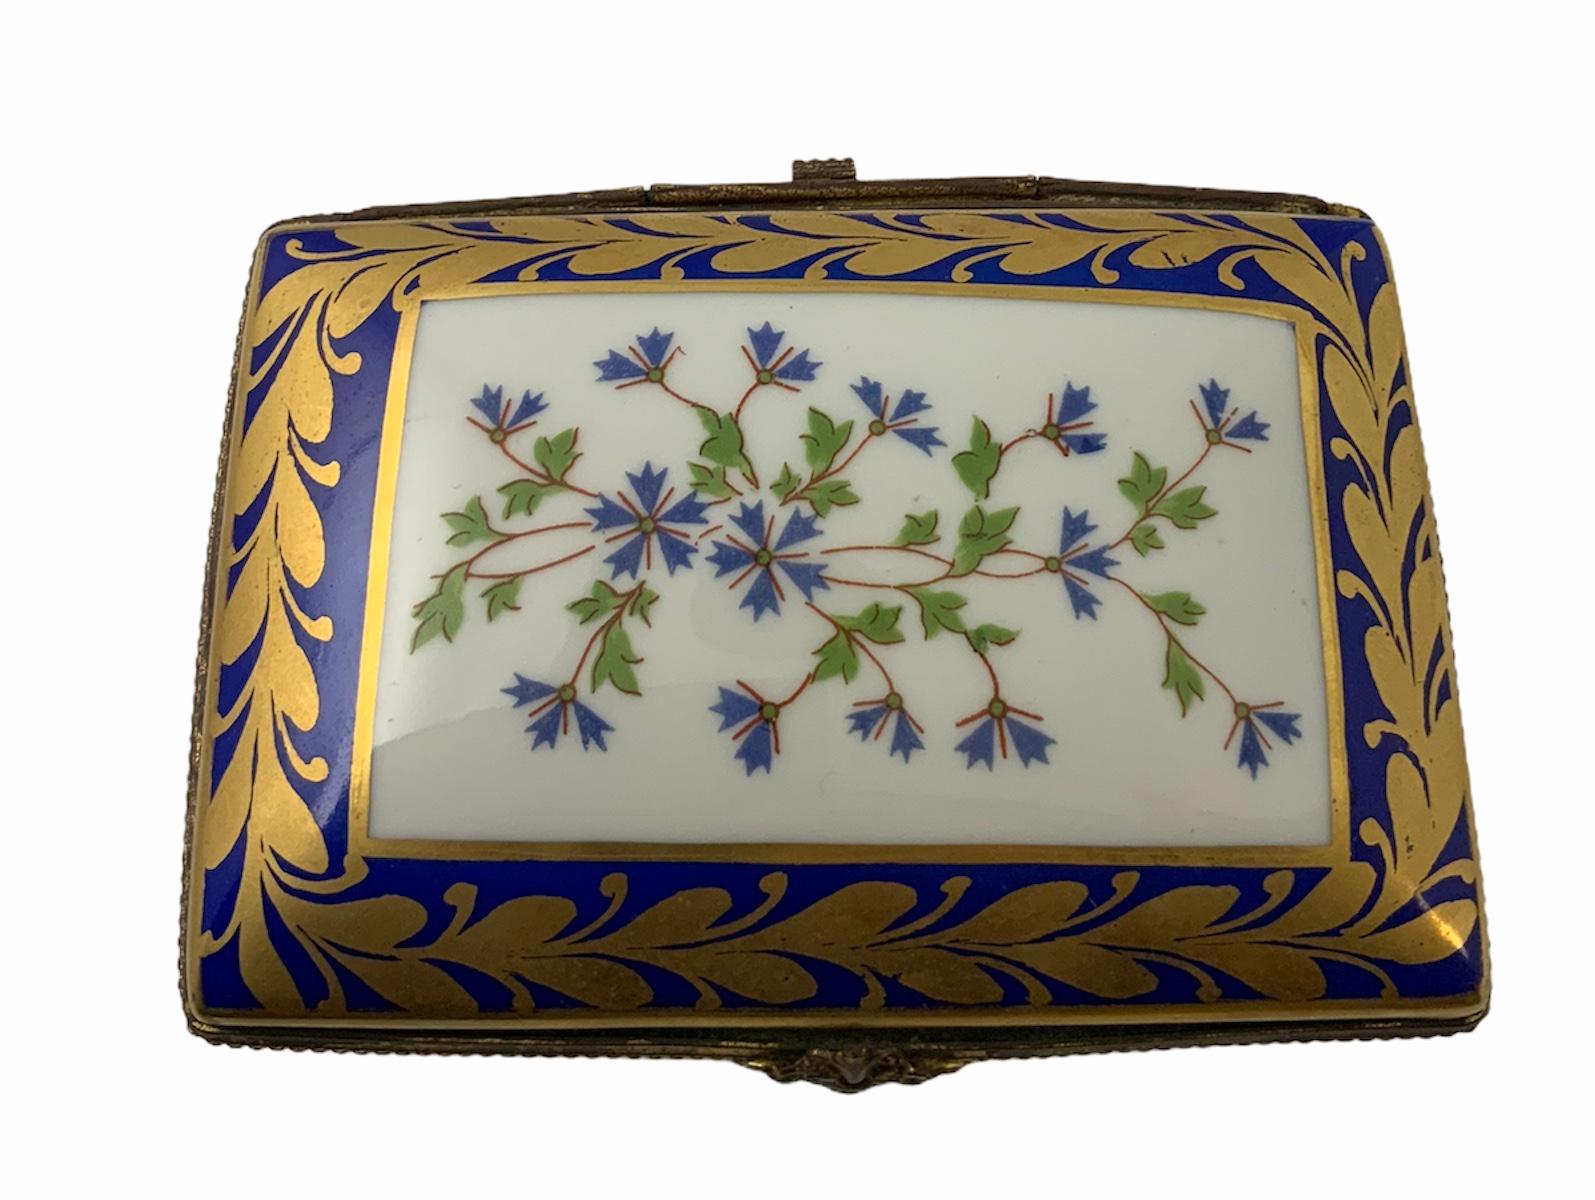 This is a rectangular hand painted porcelain box embellished by gilded olives leaves garland & blue flowers foliage. The rim of the lid & box is decorated by some golden beading chain. Inside, the lid is also hand painted by a branch of flowers.